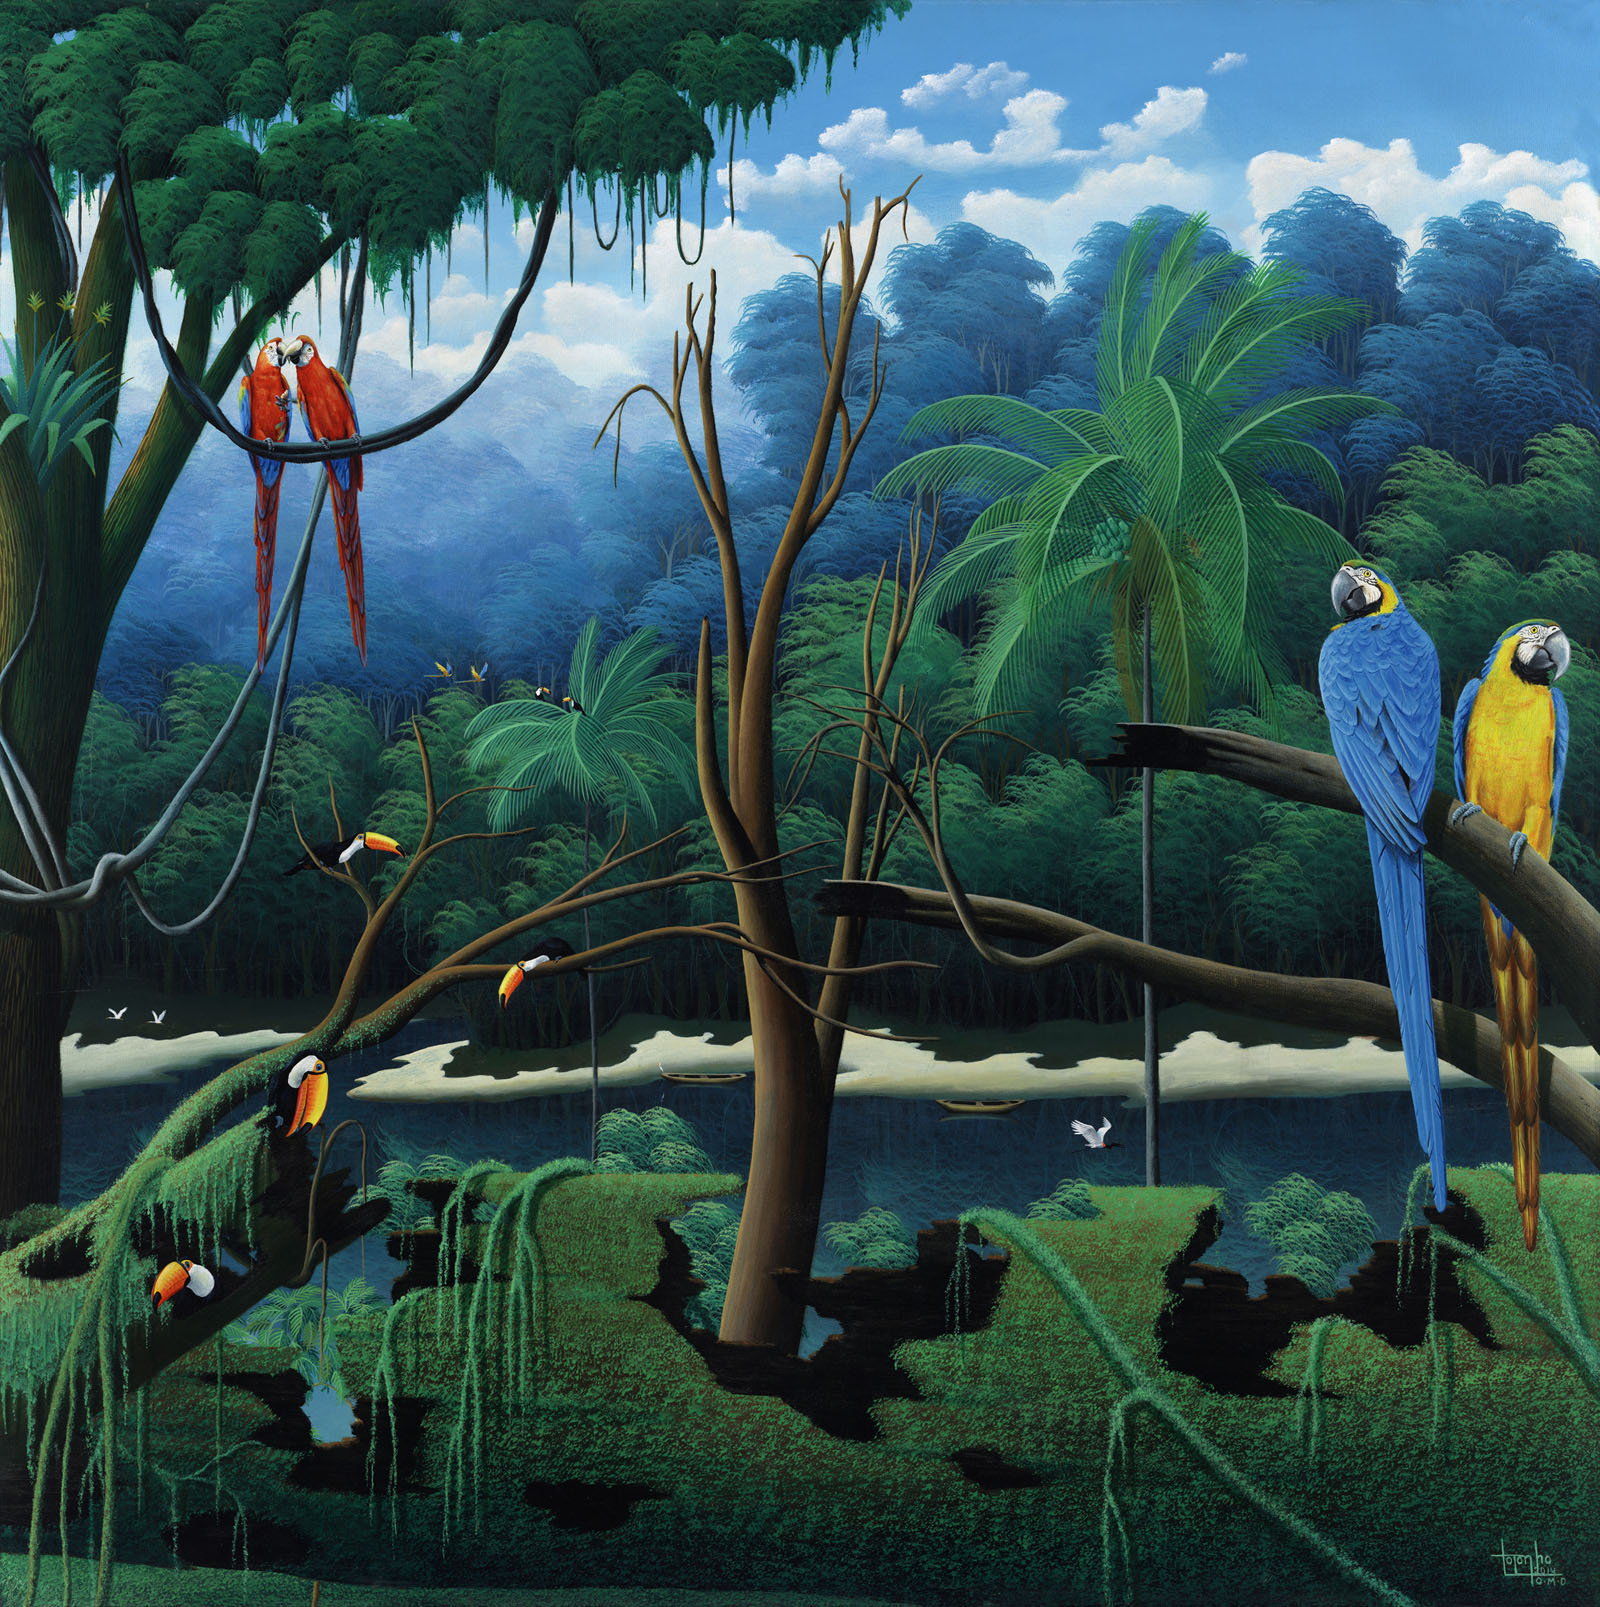 Parrots, tucans, trees, river, landscape painting, green, blue, tropical forest, painting by Totonho